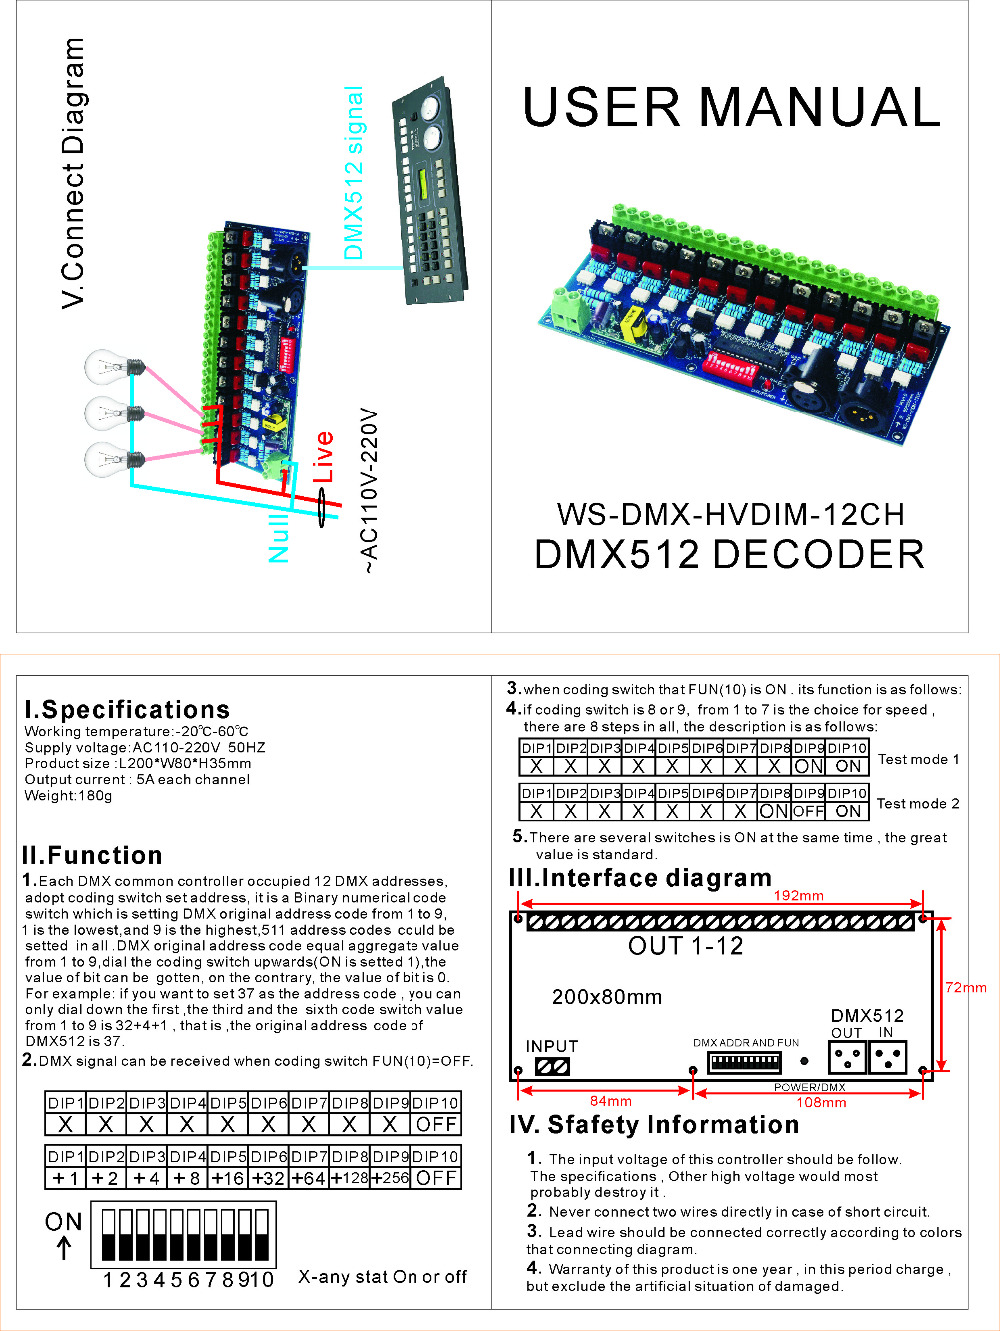 DMX_Controllers_and_Decoders_WS_DMX_HVDIM_12CH_2